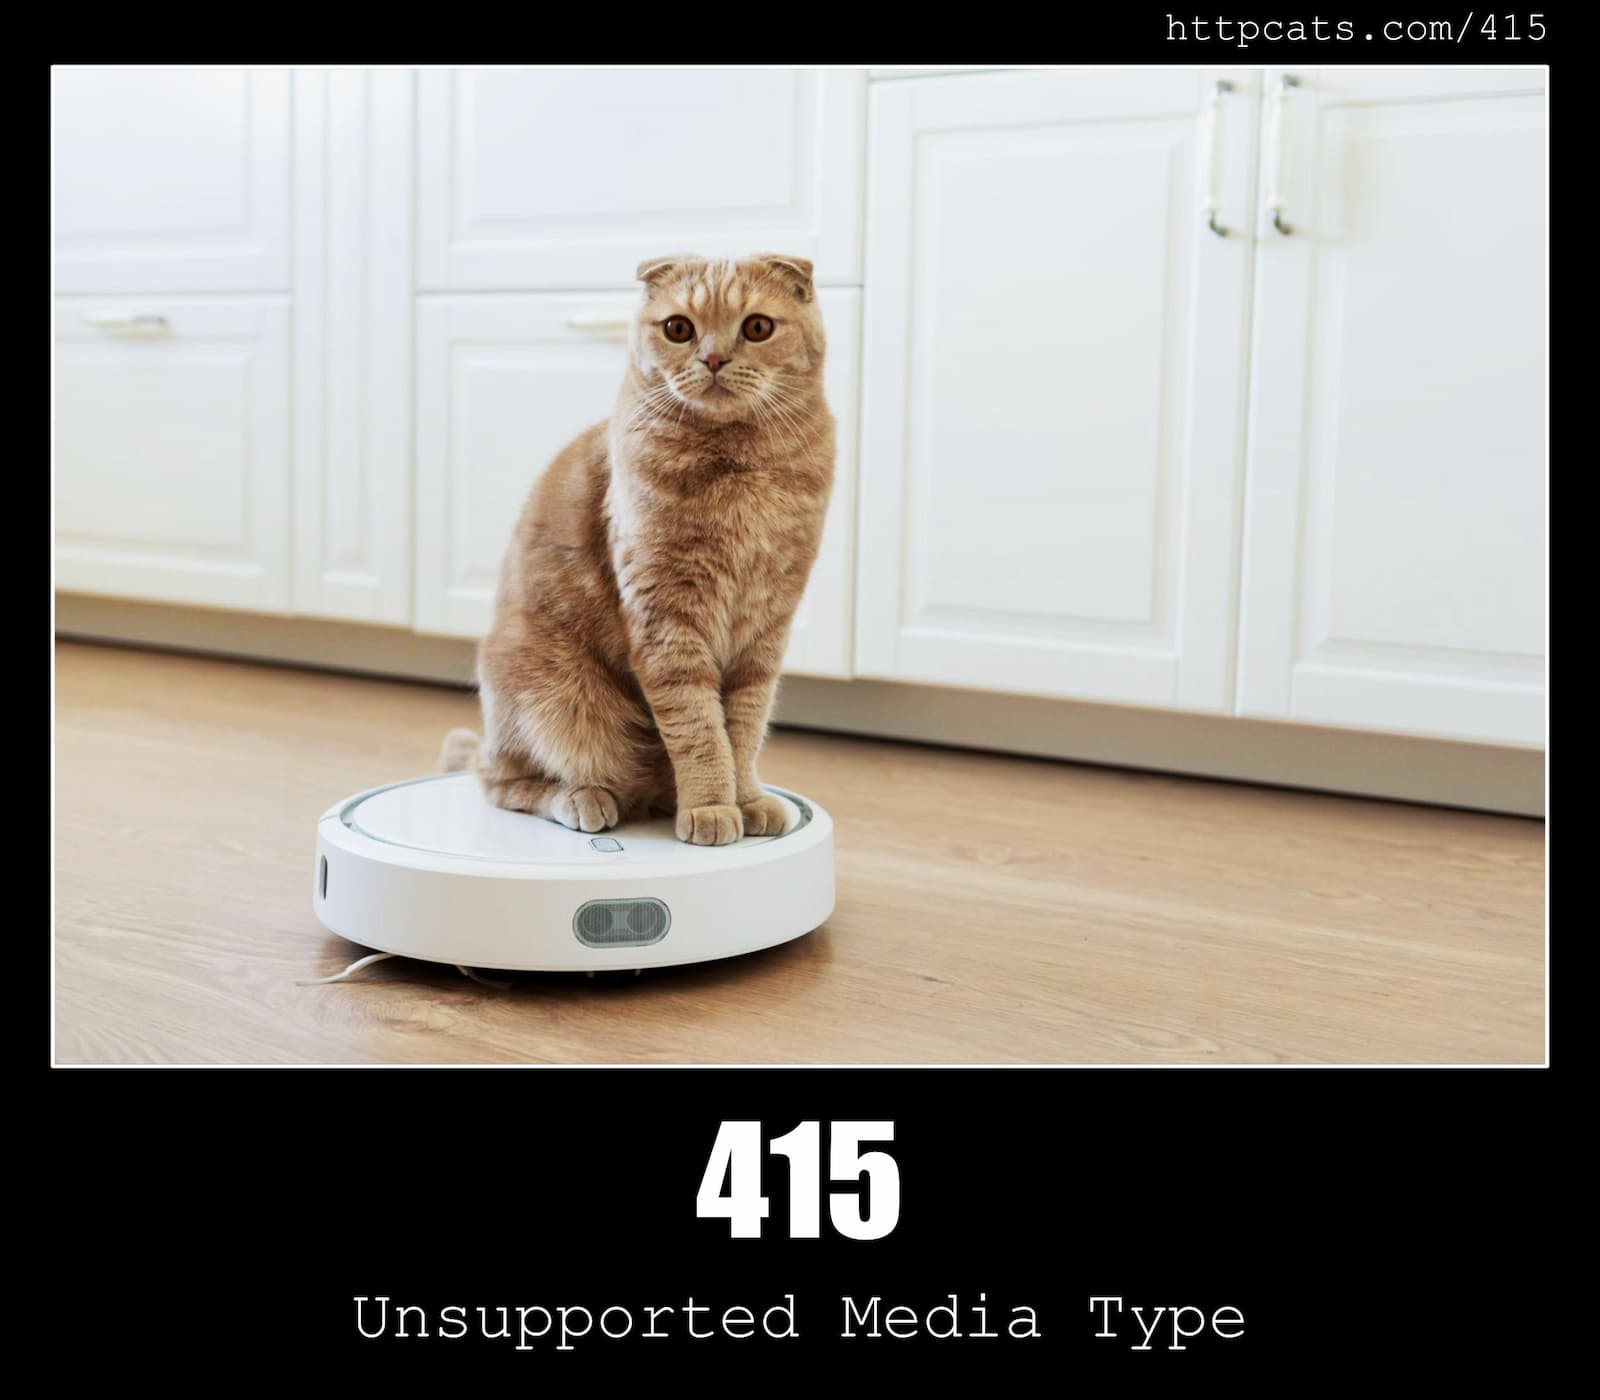 HTTP Status Code 415 Unsupported Media Type & Cats